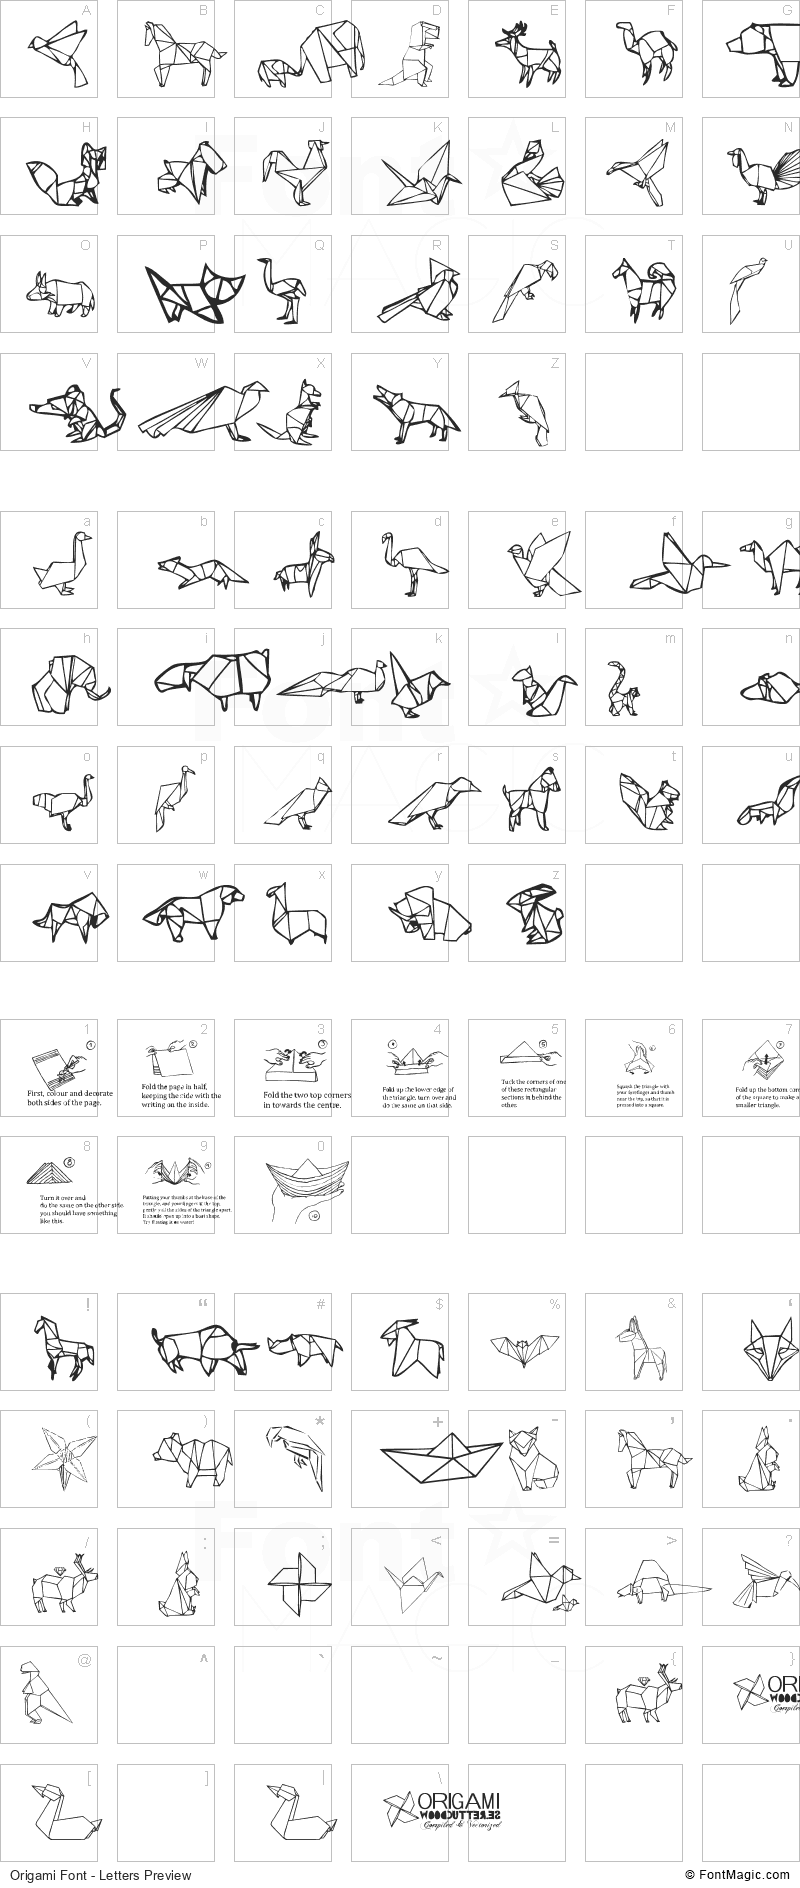 Origami Font - All Latters Preview Chart